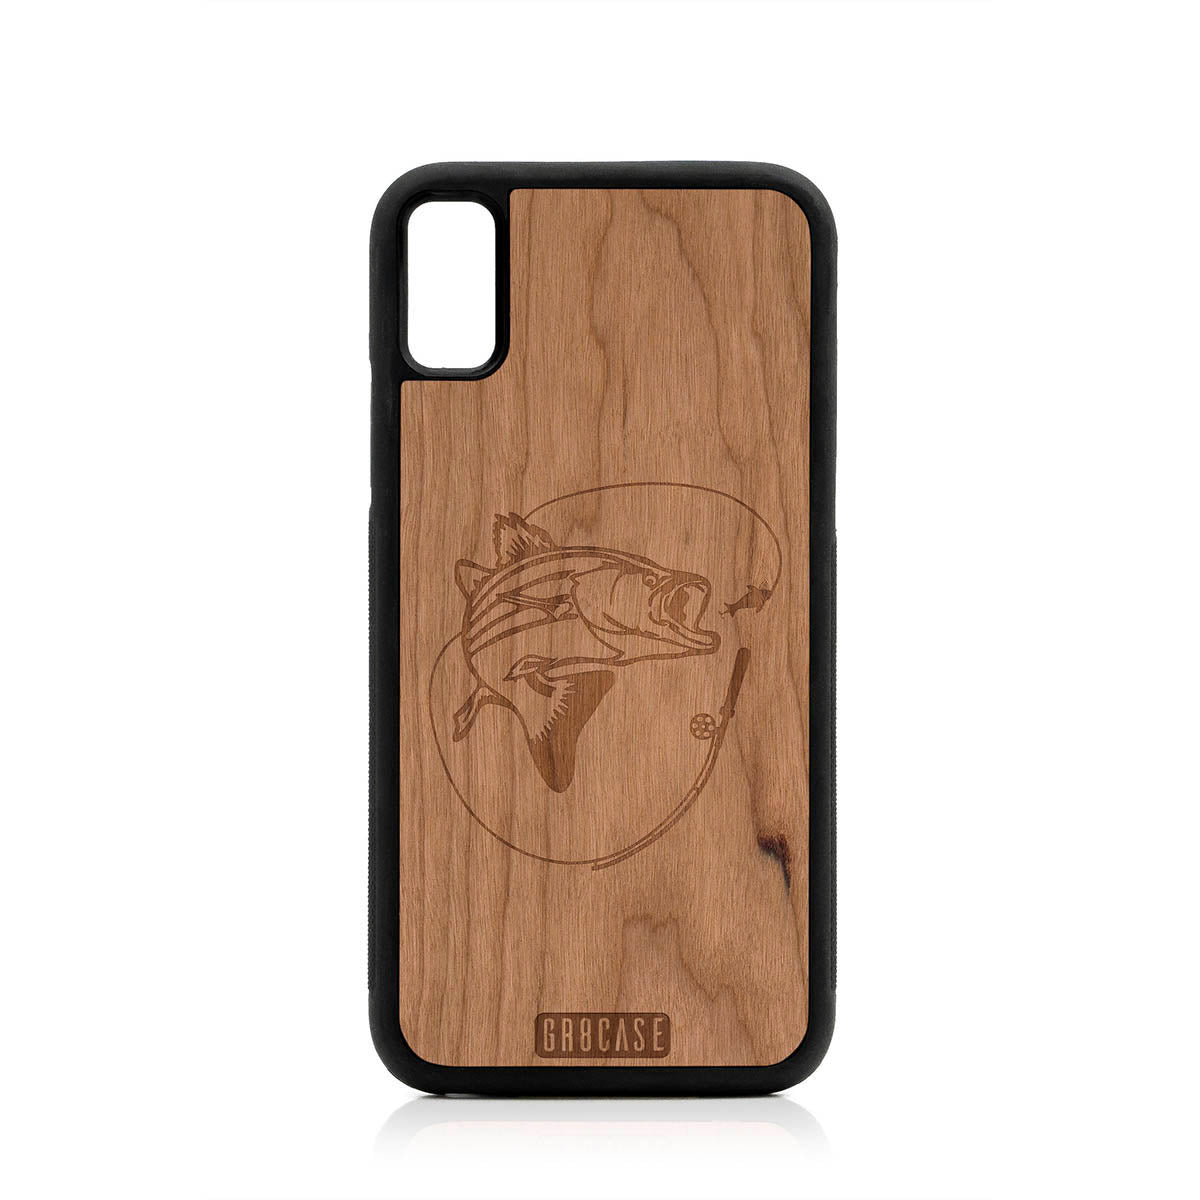 Fish and Reel Design Wood Case For iPhone XS Max by GR8CASE